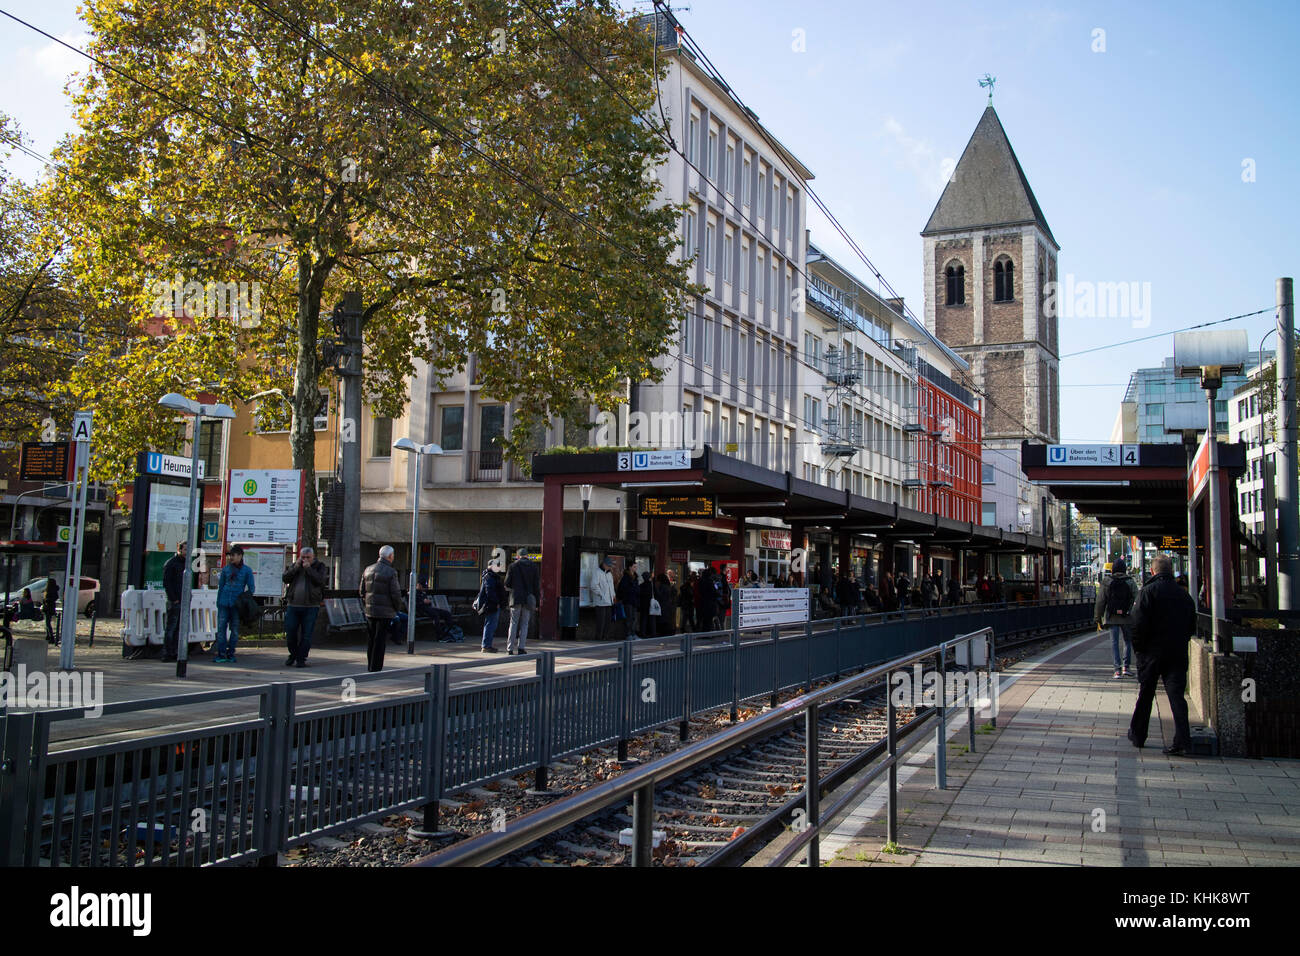 Heumarkt Cologne, Innenstadt central city district and largest city in the German federal State of North Rhine-Westphalia in Germany, Europe Stock Photo